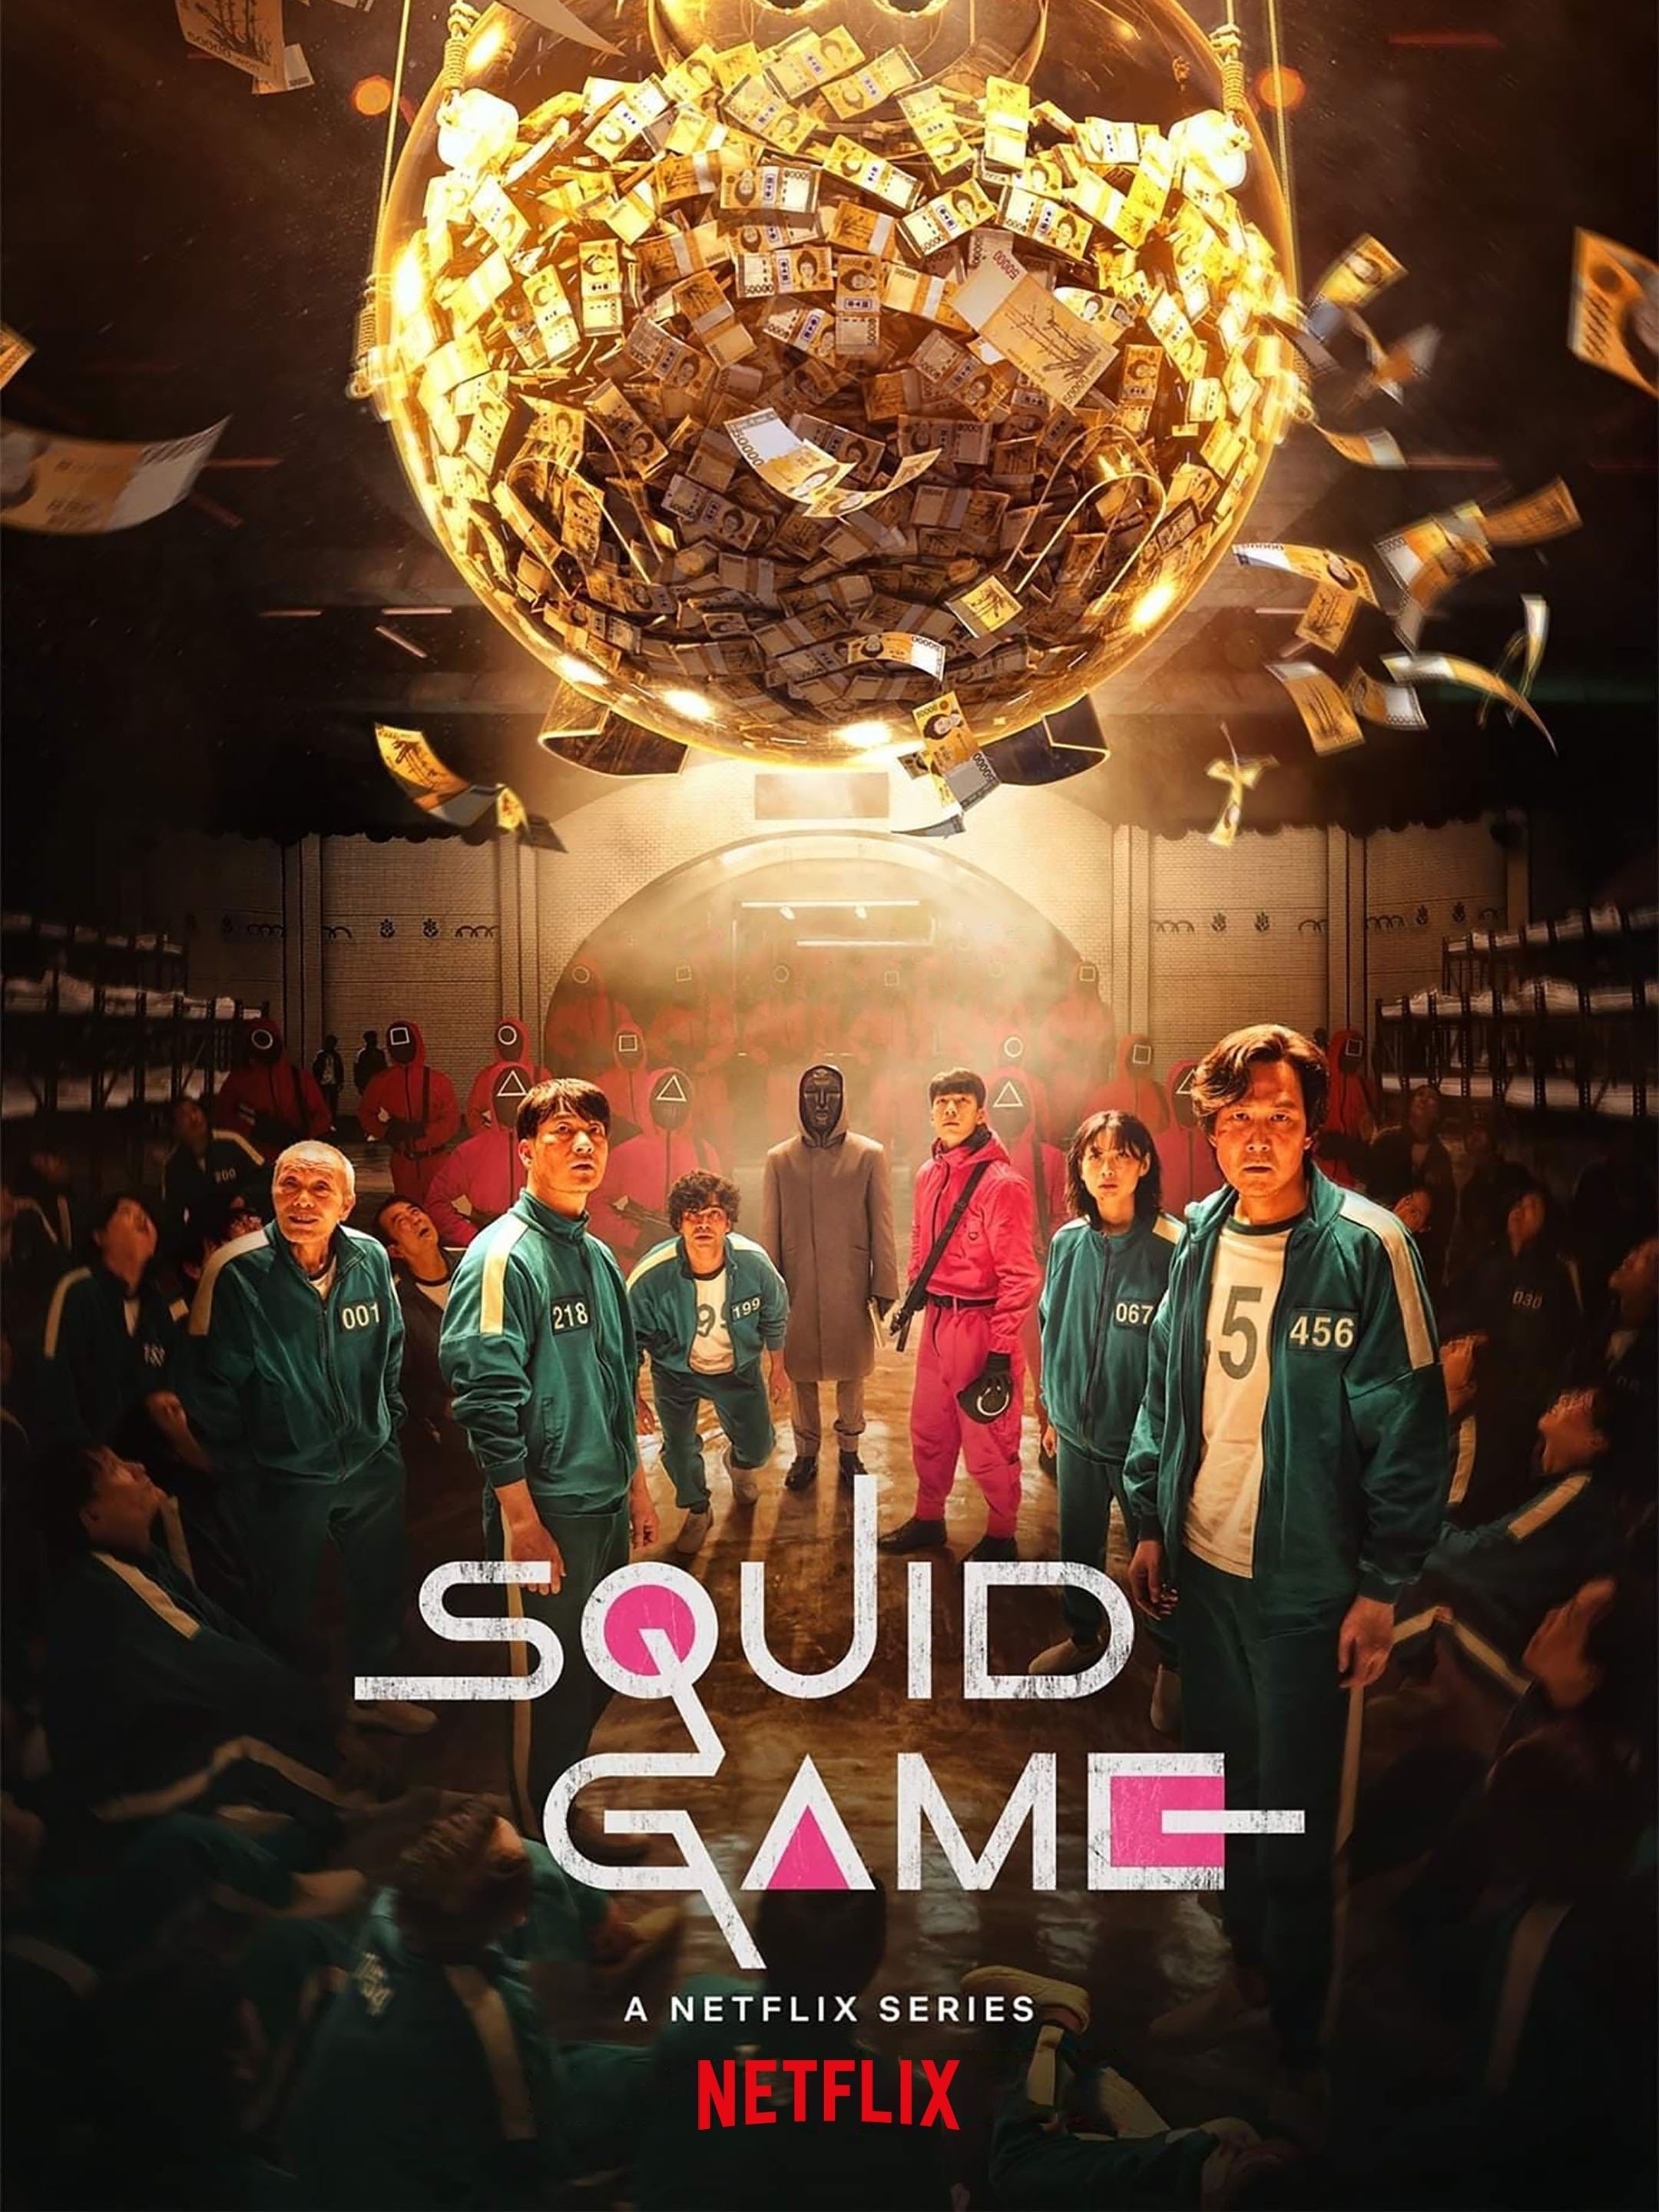 Squid Game: 5 compelling reasons to watch it